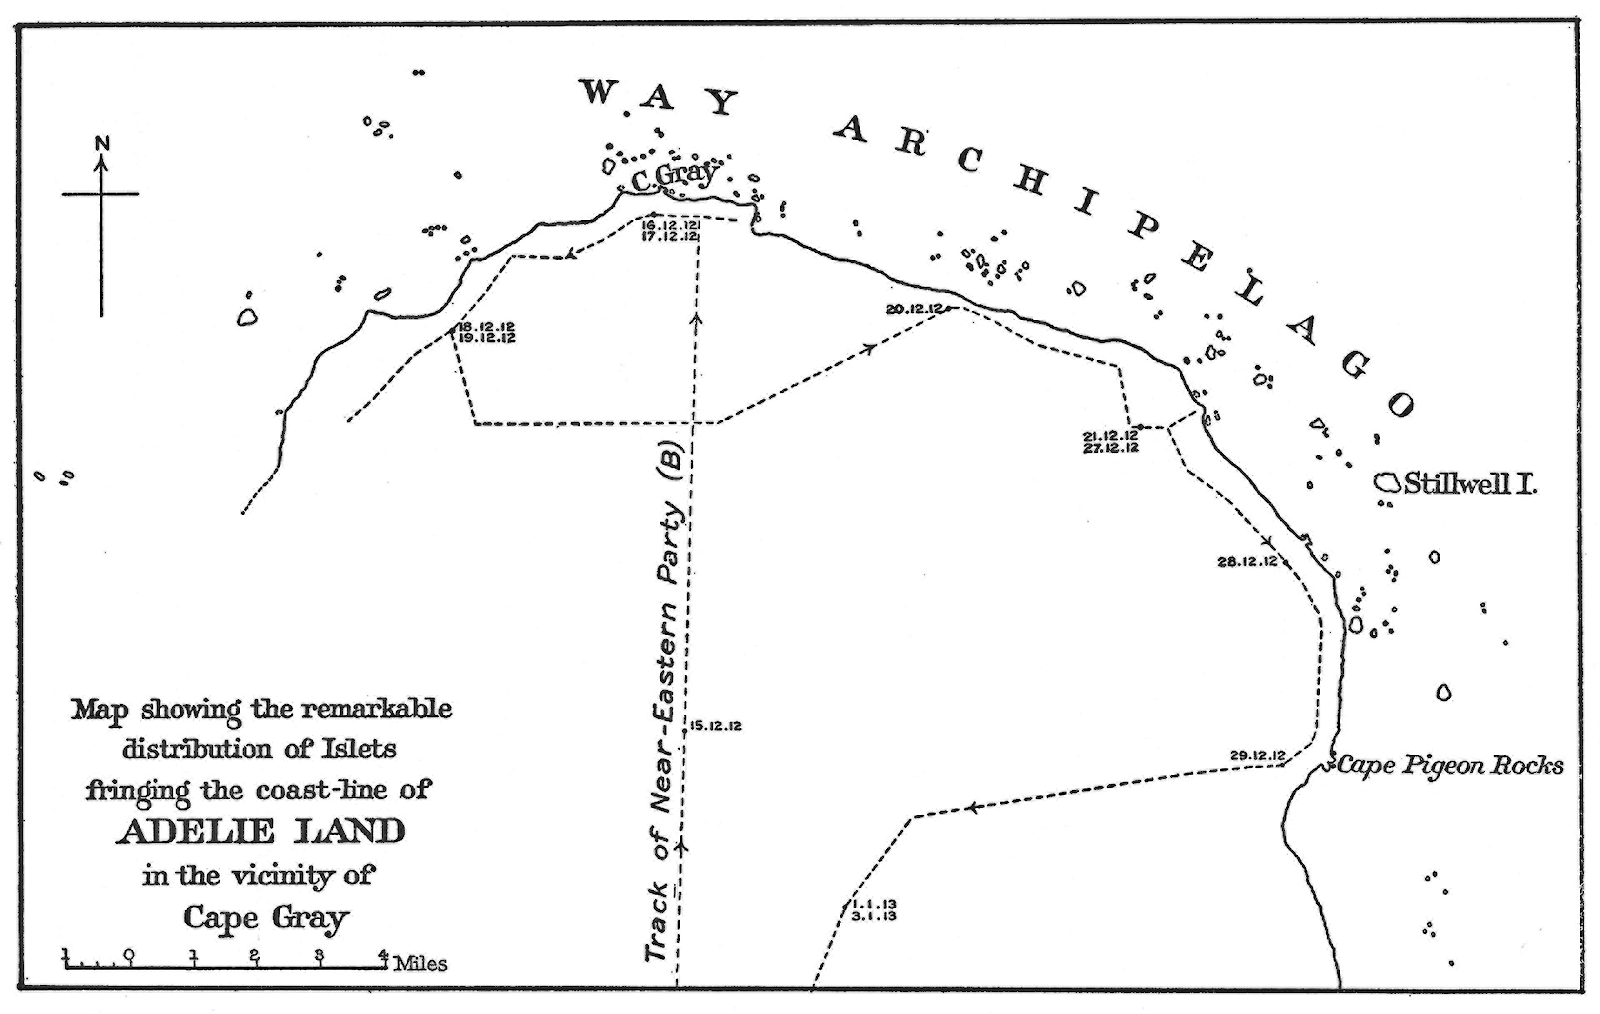 Map showing the remarkable distribution of islets fringing the coast of Adélie Land in the vicinity of Cape Gray.